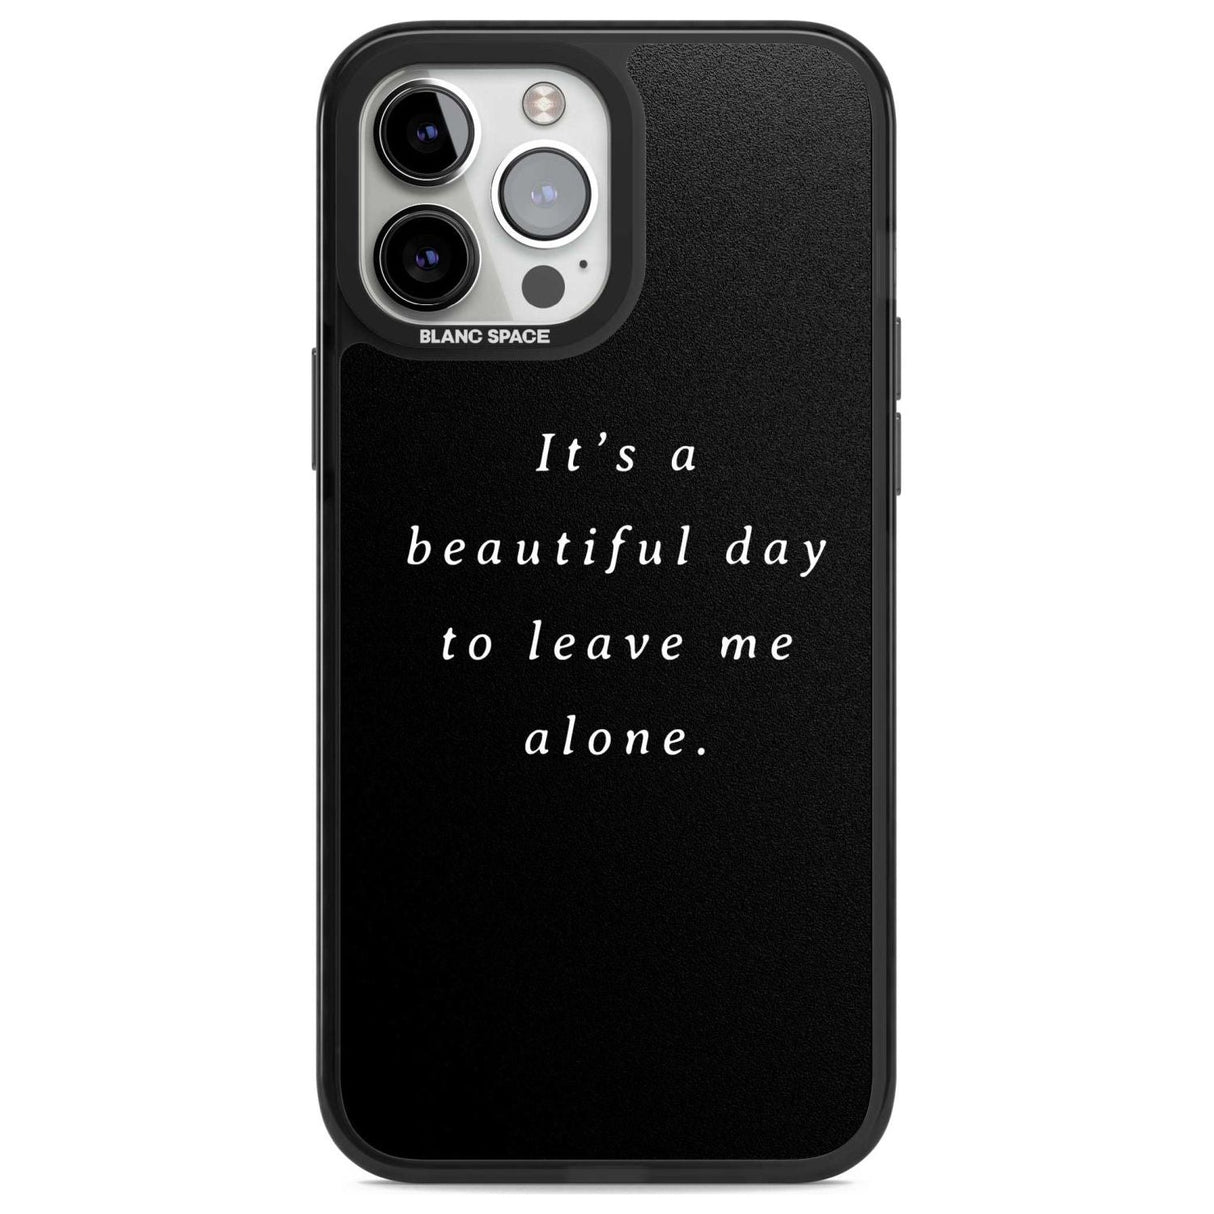 Leave me alone Phone Case iPhone 13 Pro Max / Magsafe Black Impact Case Blanc Space